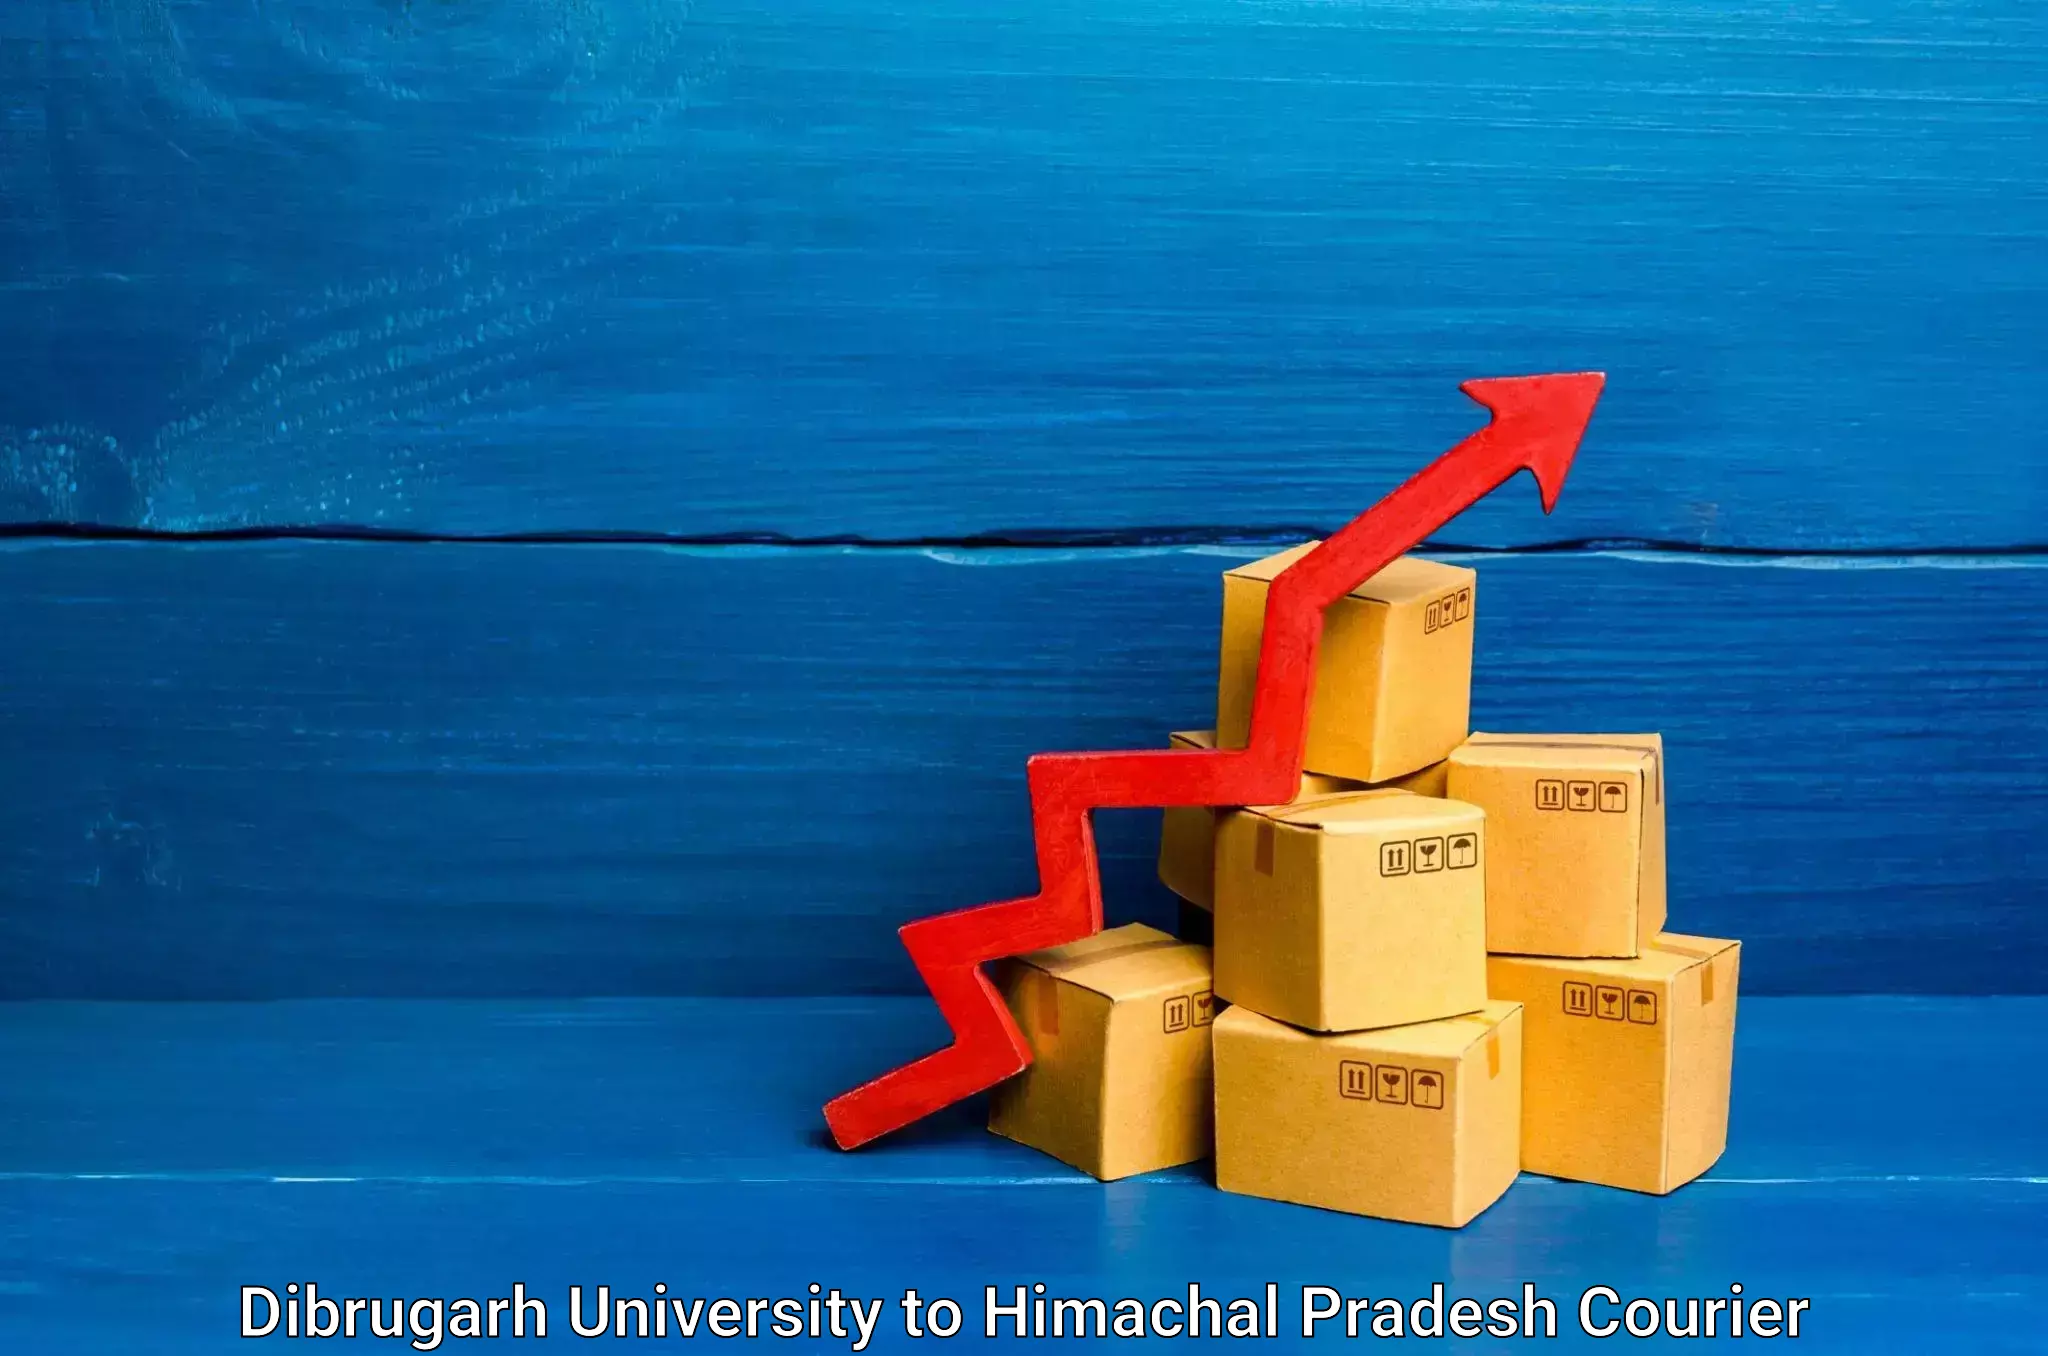 Fastest parcel delivery Dibrugarh University to Palampur